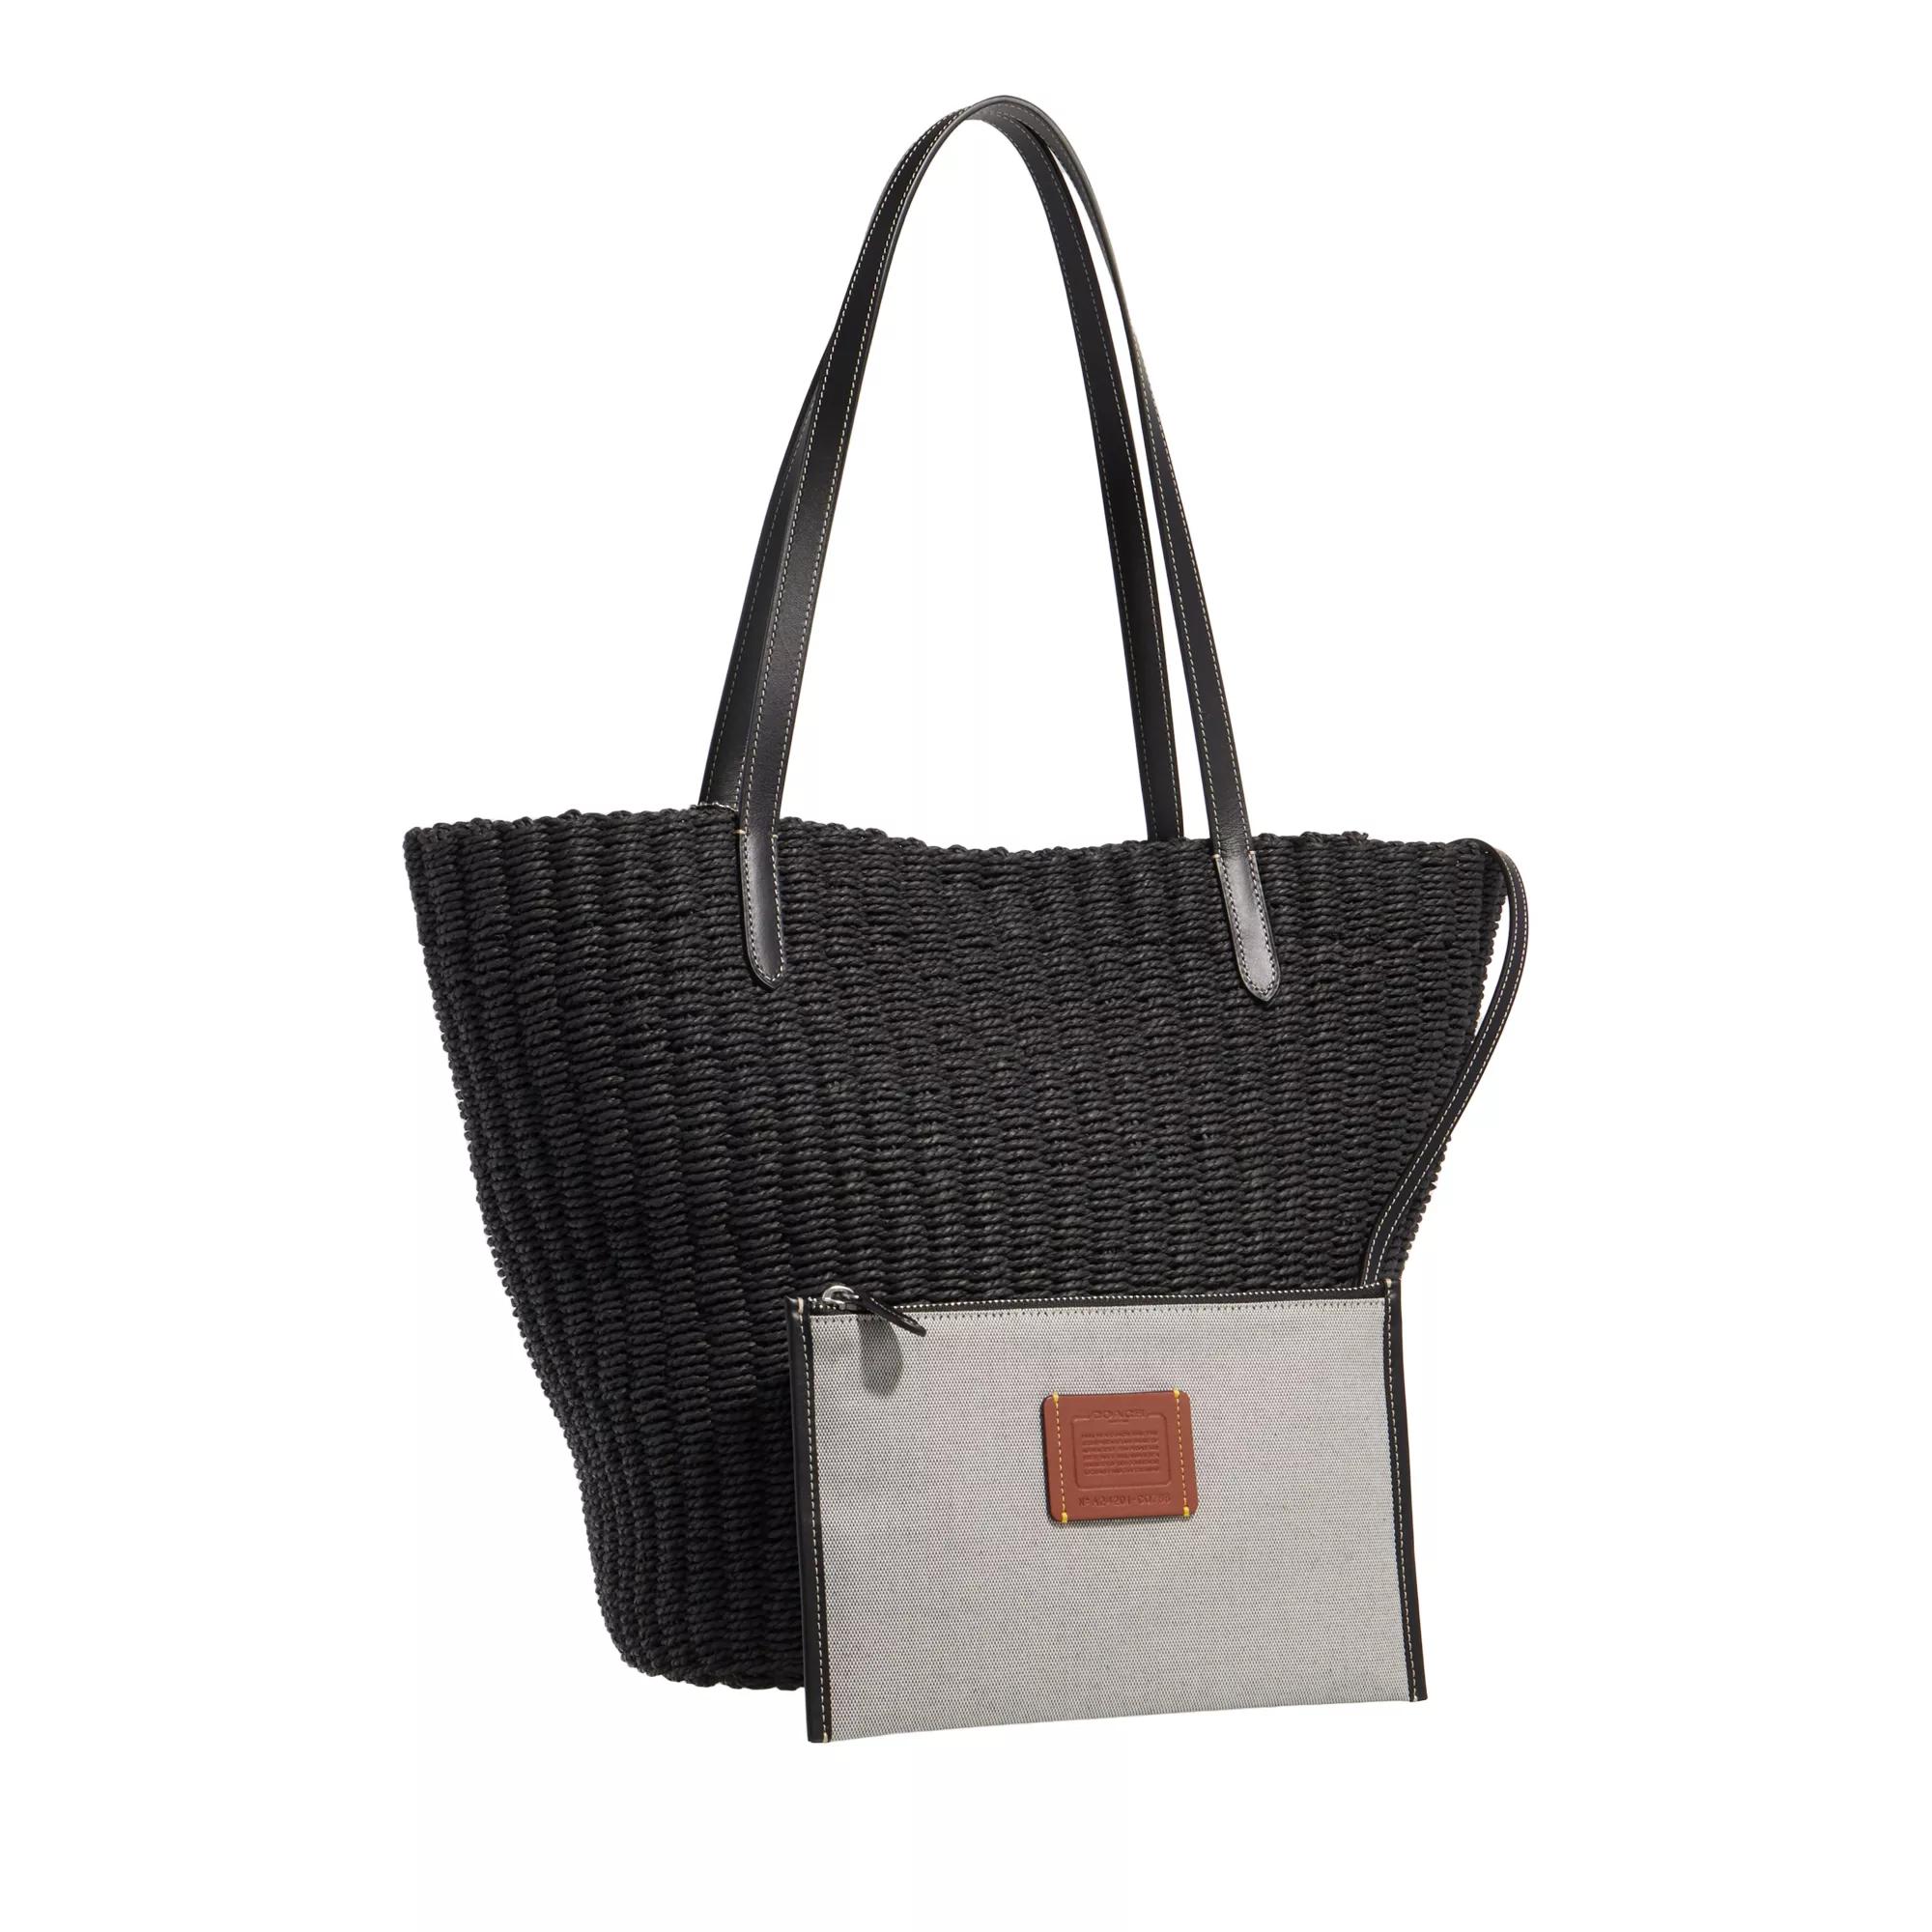 Coach Totes Straw Tote in zwart